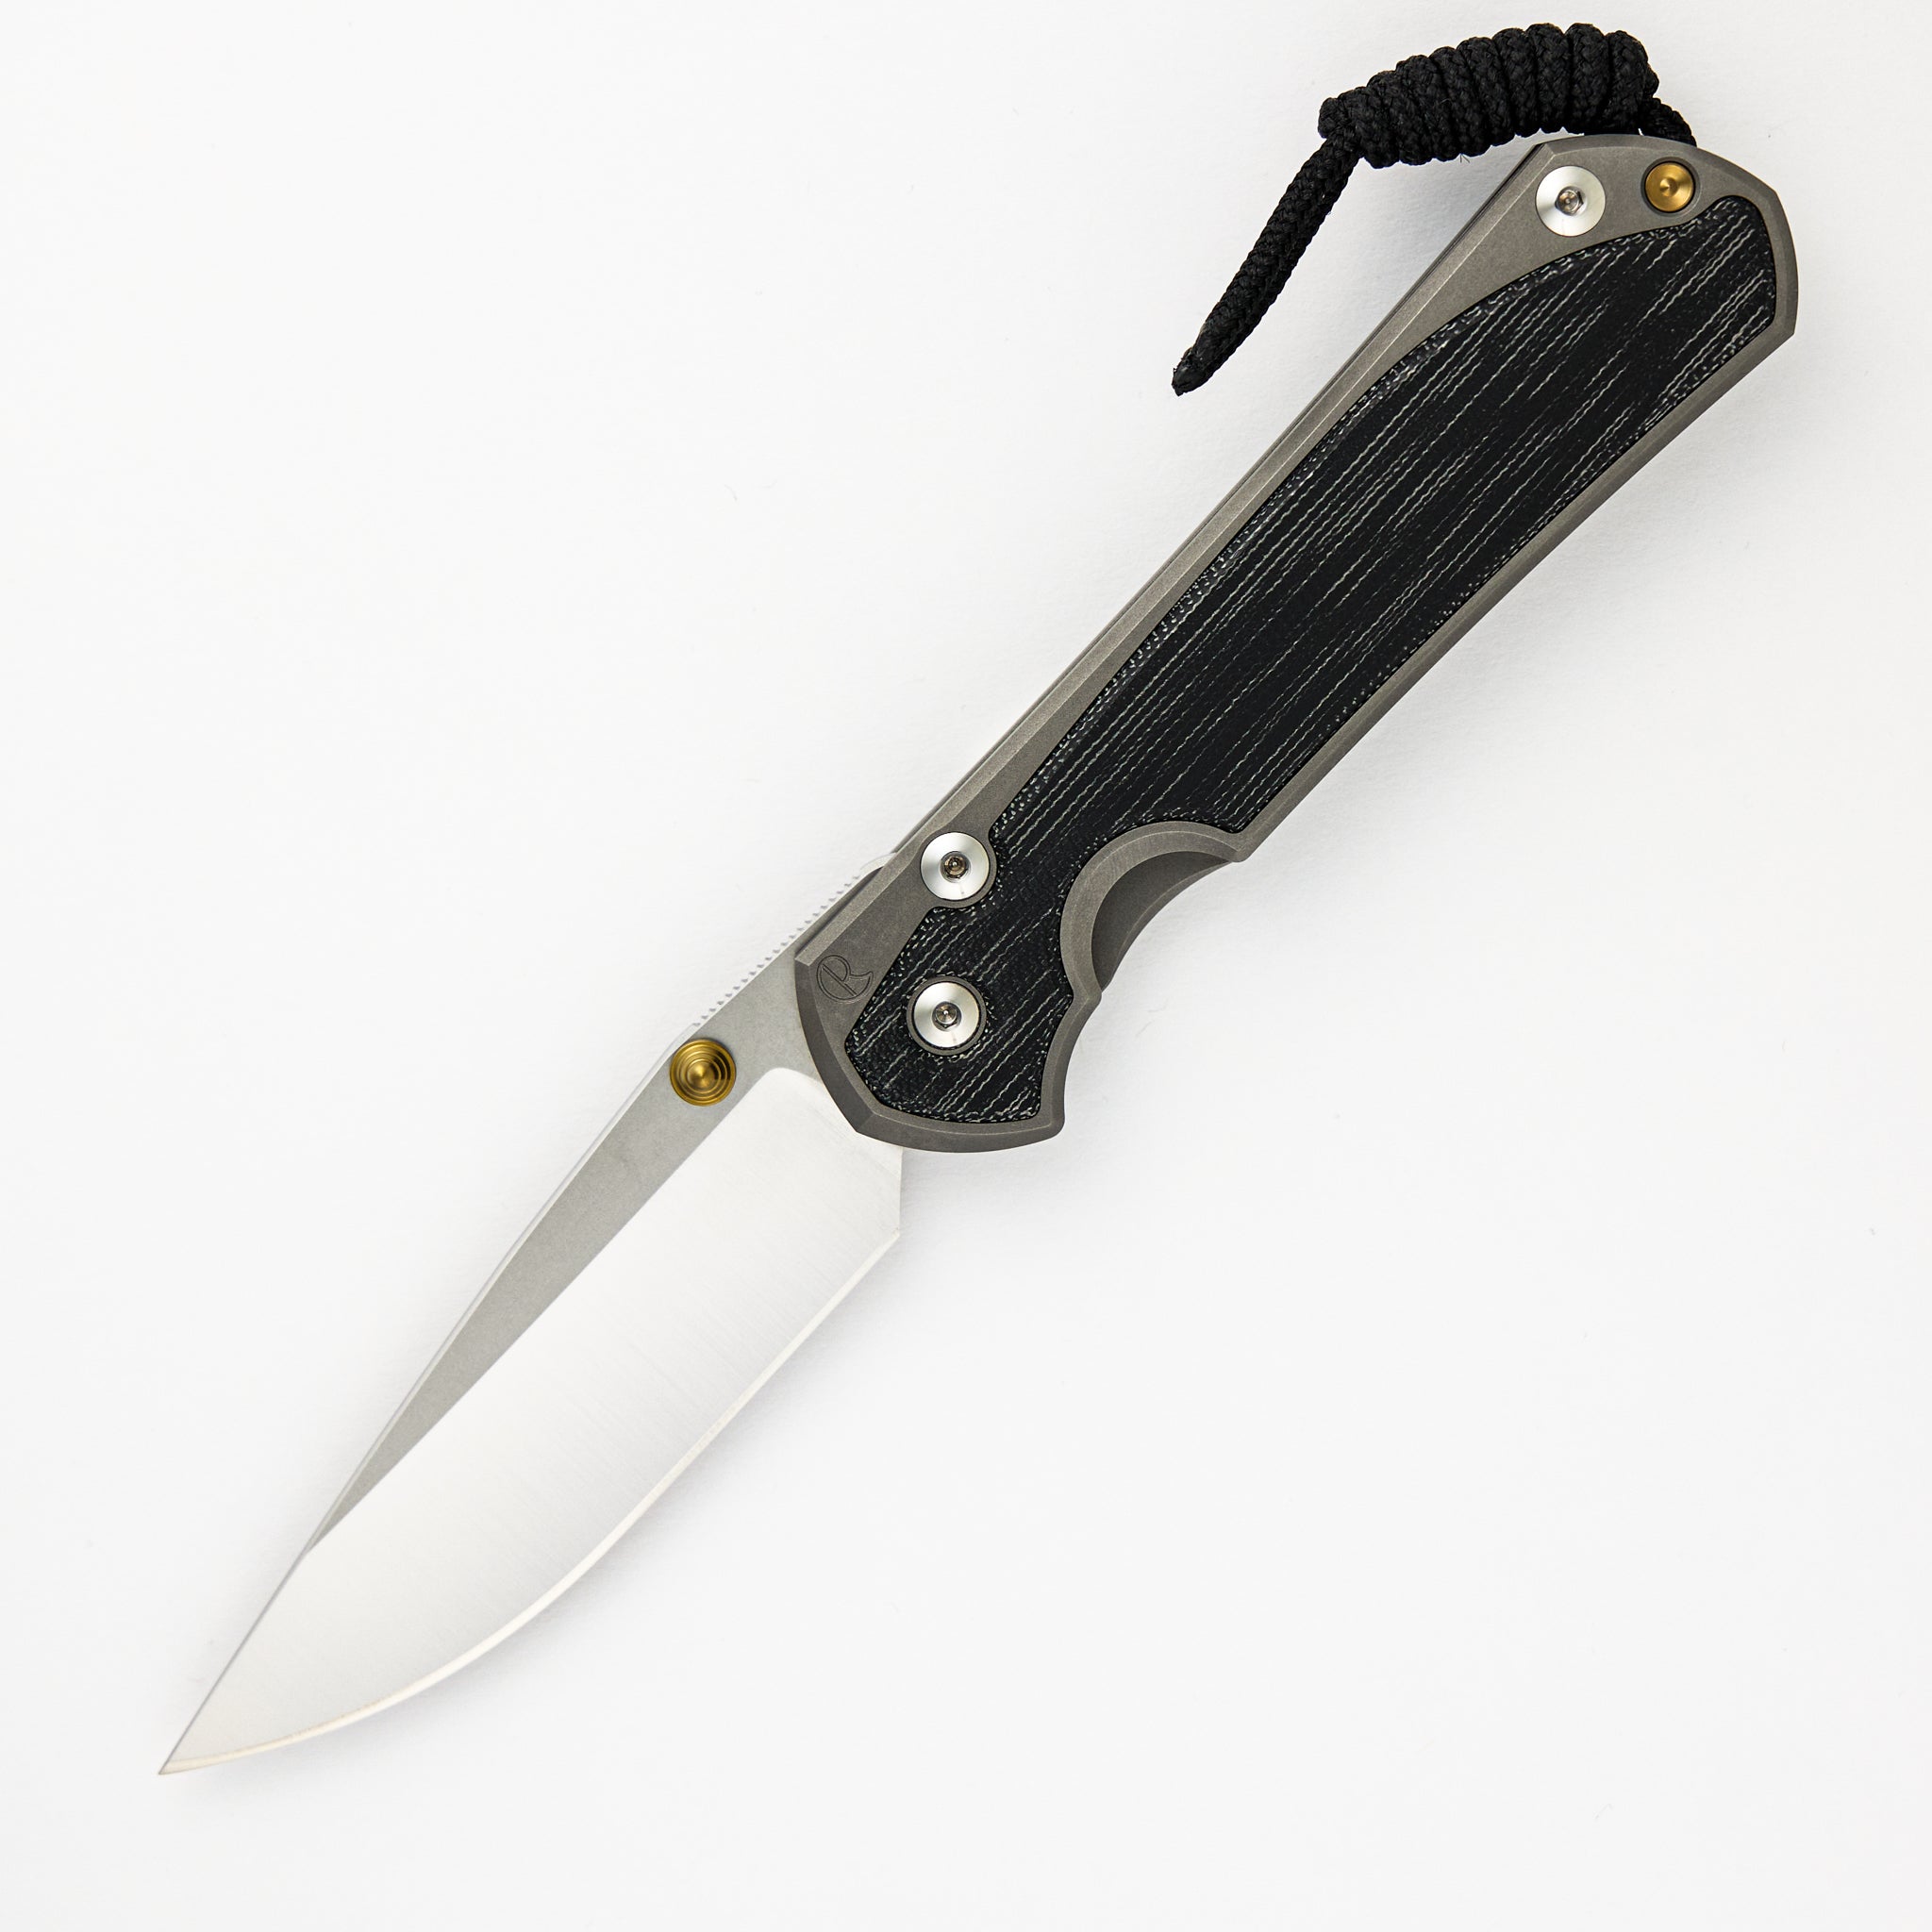 CHRIS REEVE LARGE SEBENZA 31 BLACK CANVAS MICARTA INLAY – POLISHED CPM MAGNACUT BLADE – GLASS BLASTED - GOLD DOUBLE THUMB LUGS